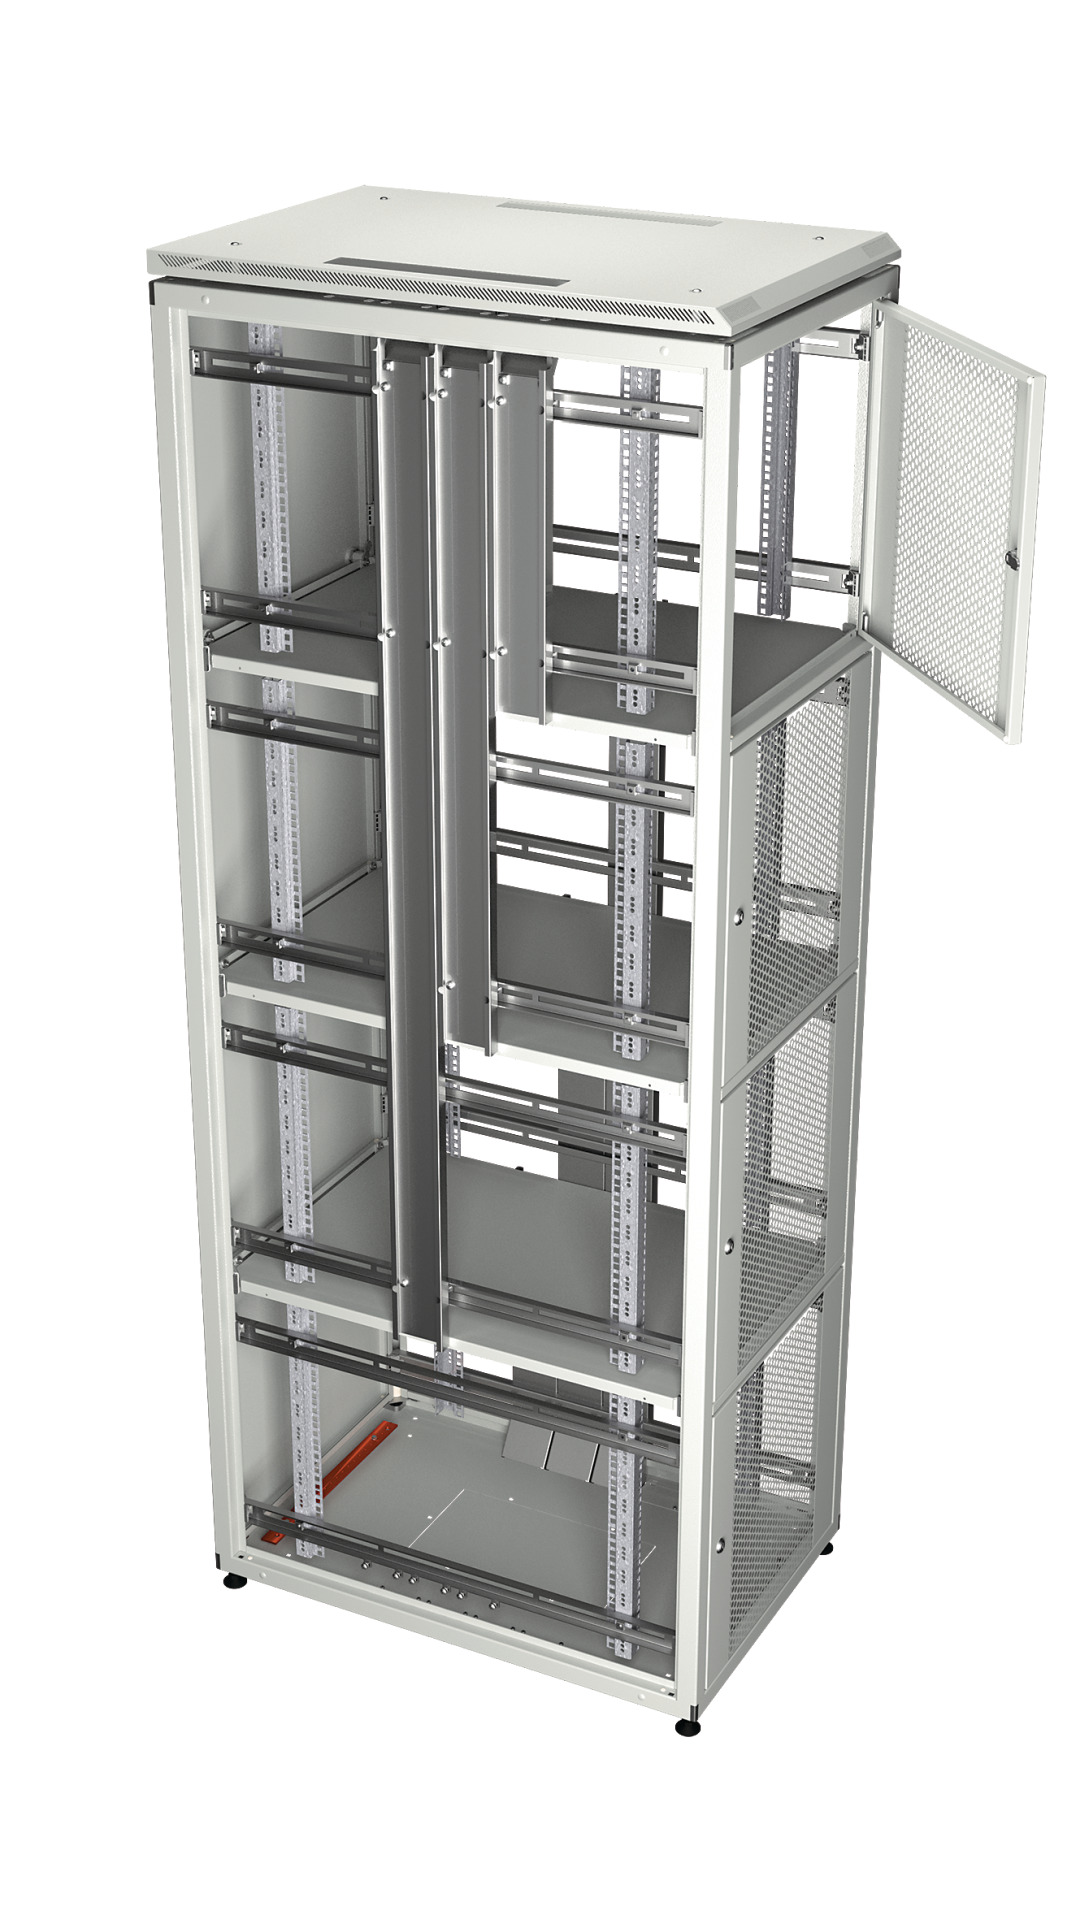 Co-Location Rack PRO, 2 x 23HE, 600x1000 mm, F+R 1-tlg. perforiert, RAL7035